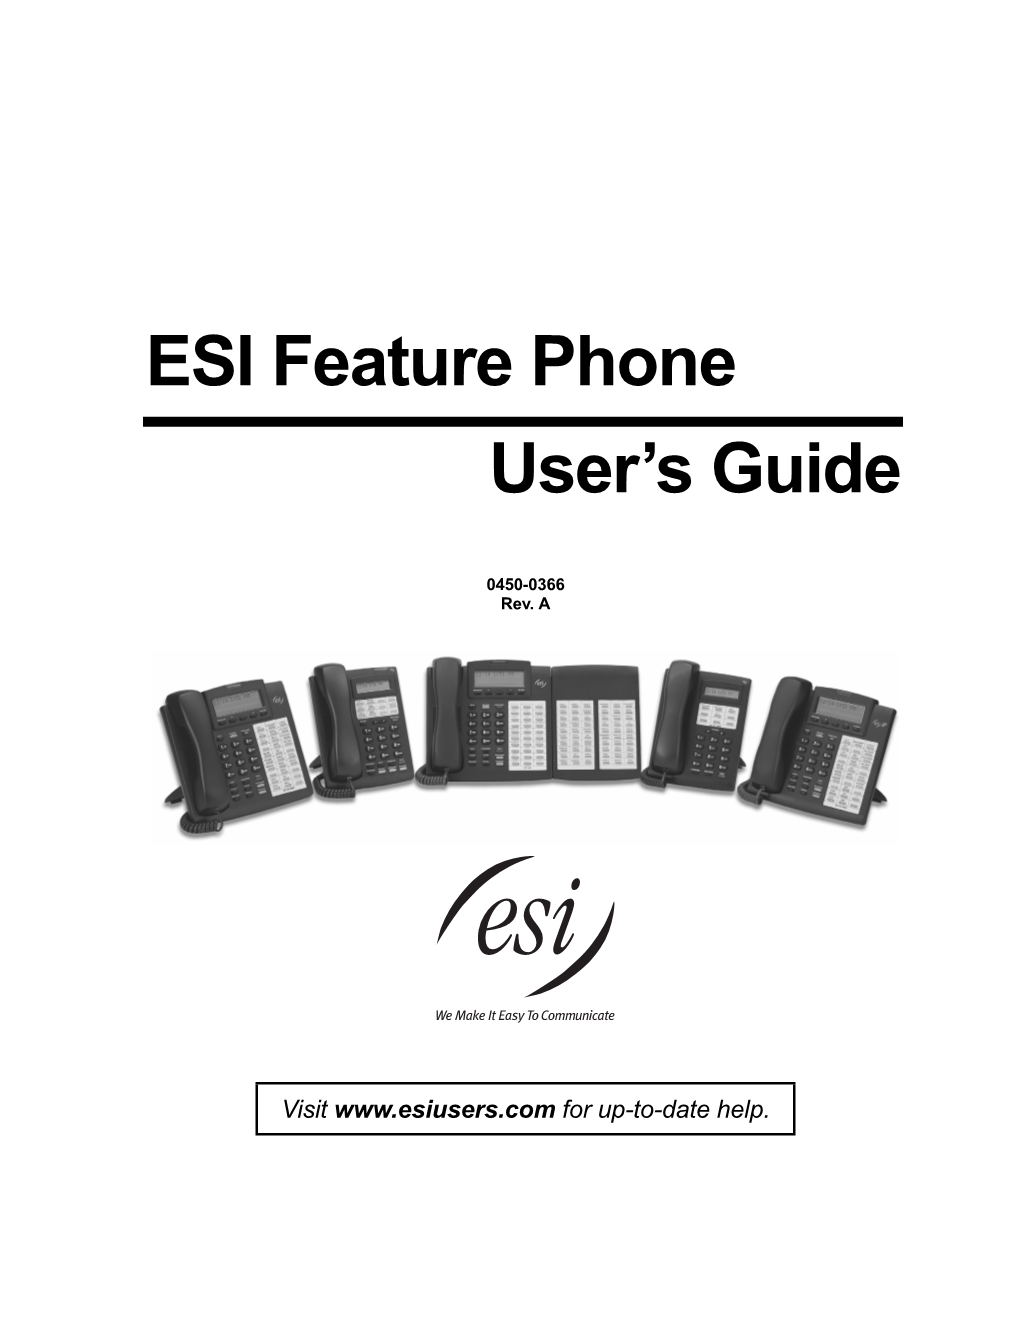 ESI Feature Phone User's Guide